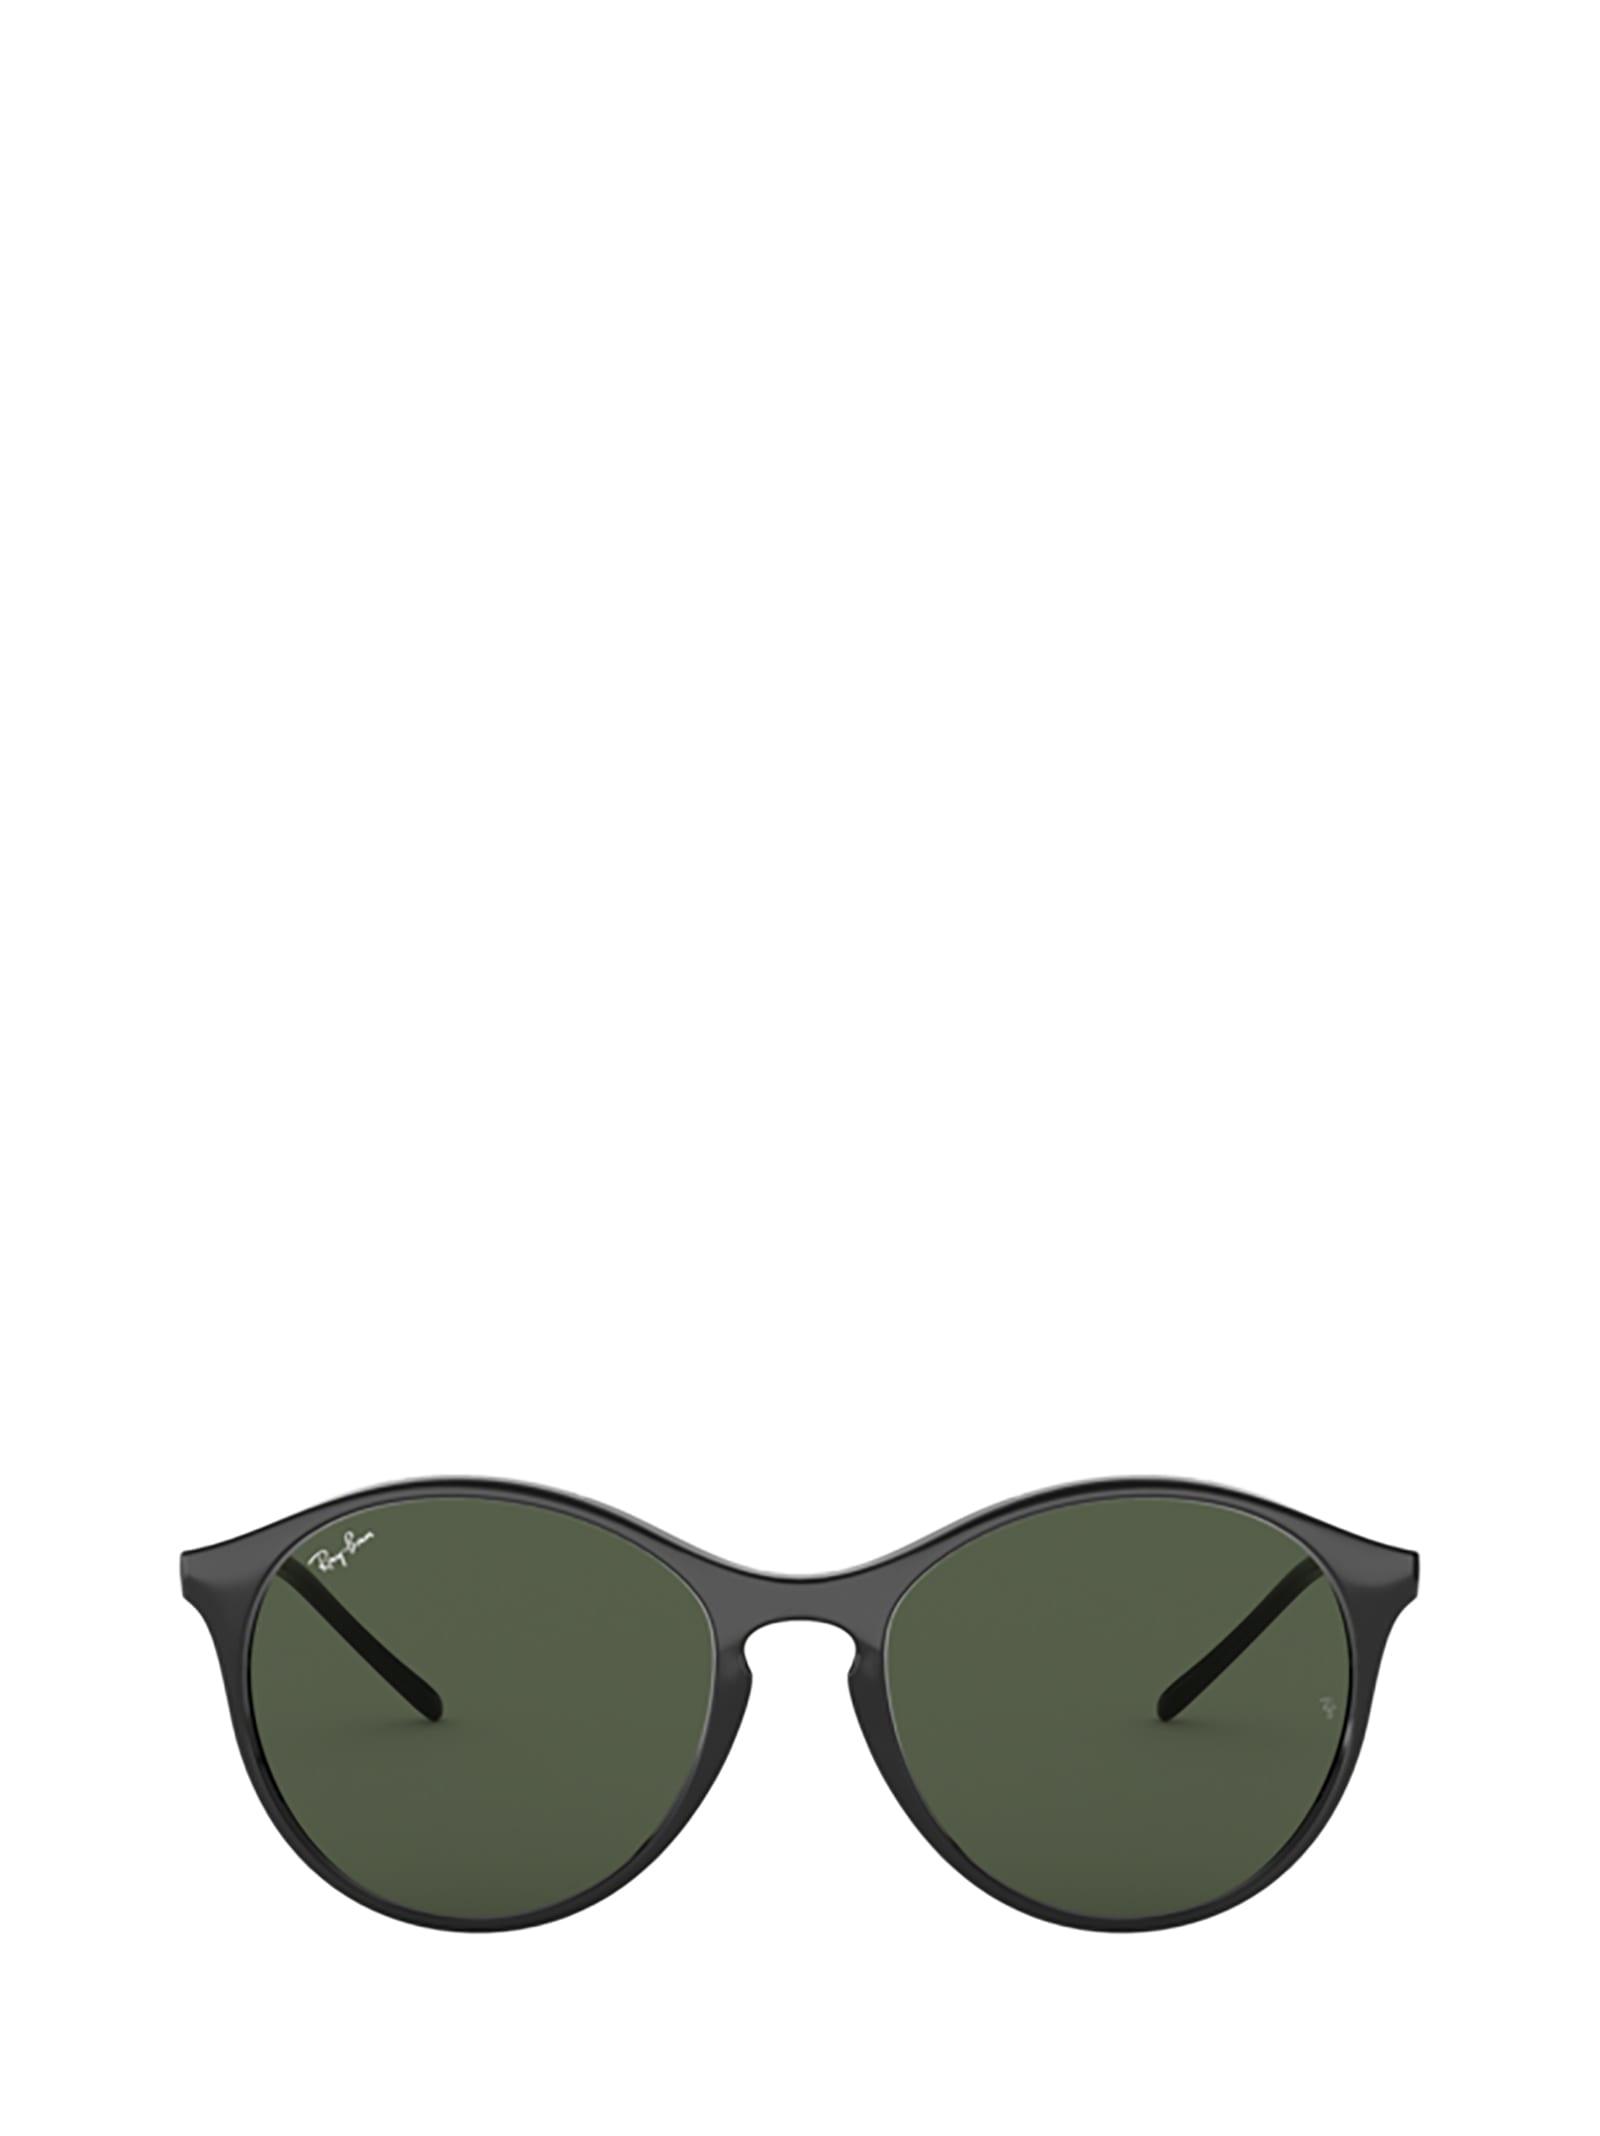 Ray-Ban Rb4371 Black Sunglasses in Green | Lyst